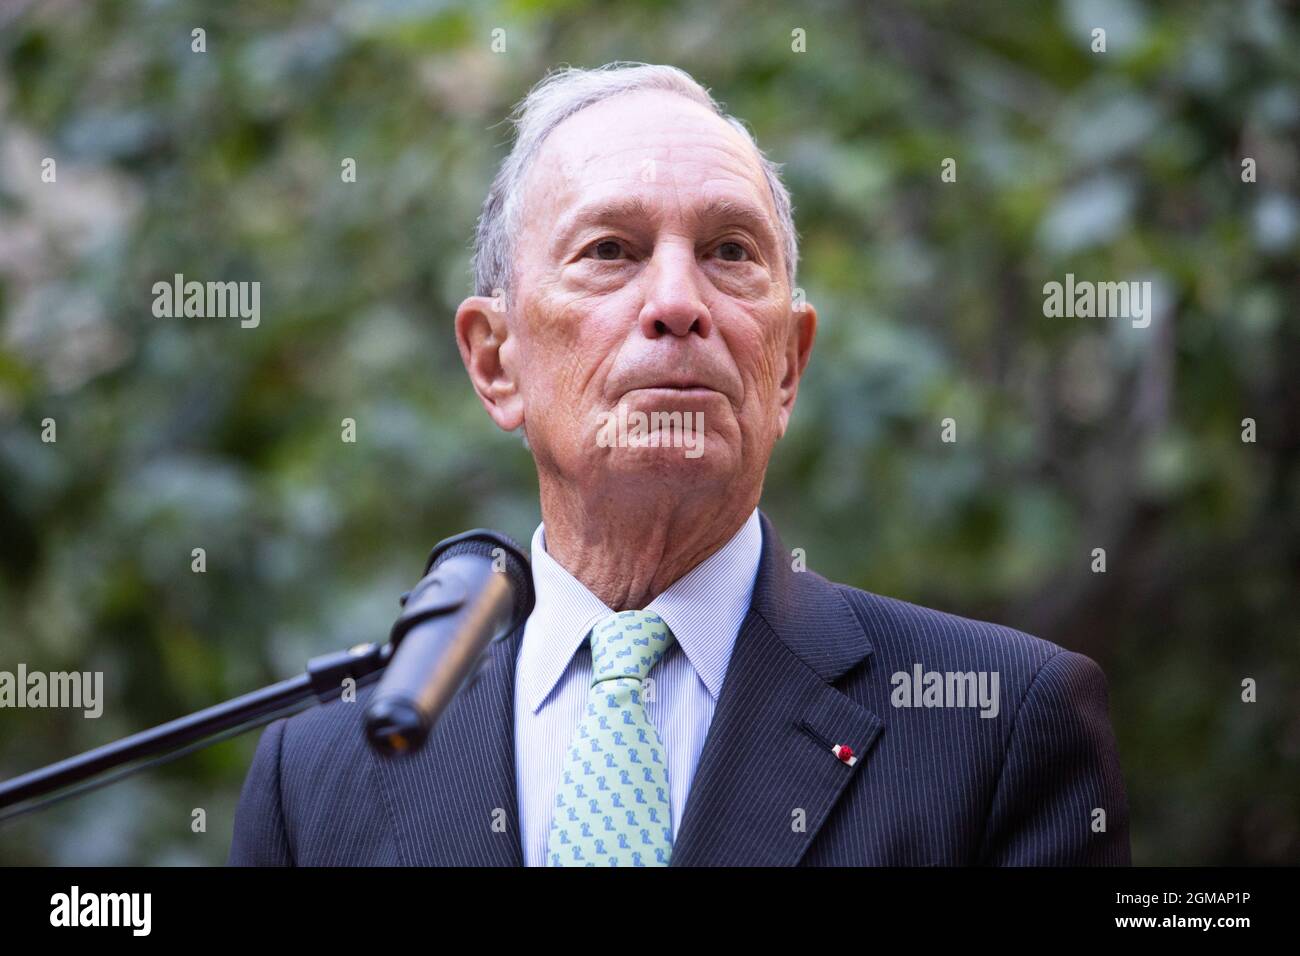 Paris, France. 17th Sep, 2021. Former New York mayor Michael Bloomberg a he meets with Paris Mayor to sign a partnership agreement to fight pollution, in Paris, France, 17 September 2021. Photo by Raphael Lafargue/ABACAPRESS.COM Credit: Abaca Press/Alamy Live News Stock Photo